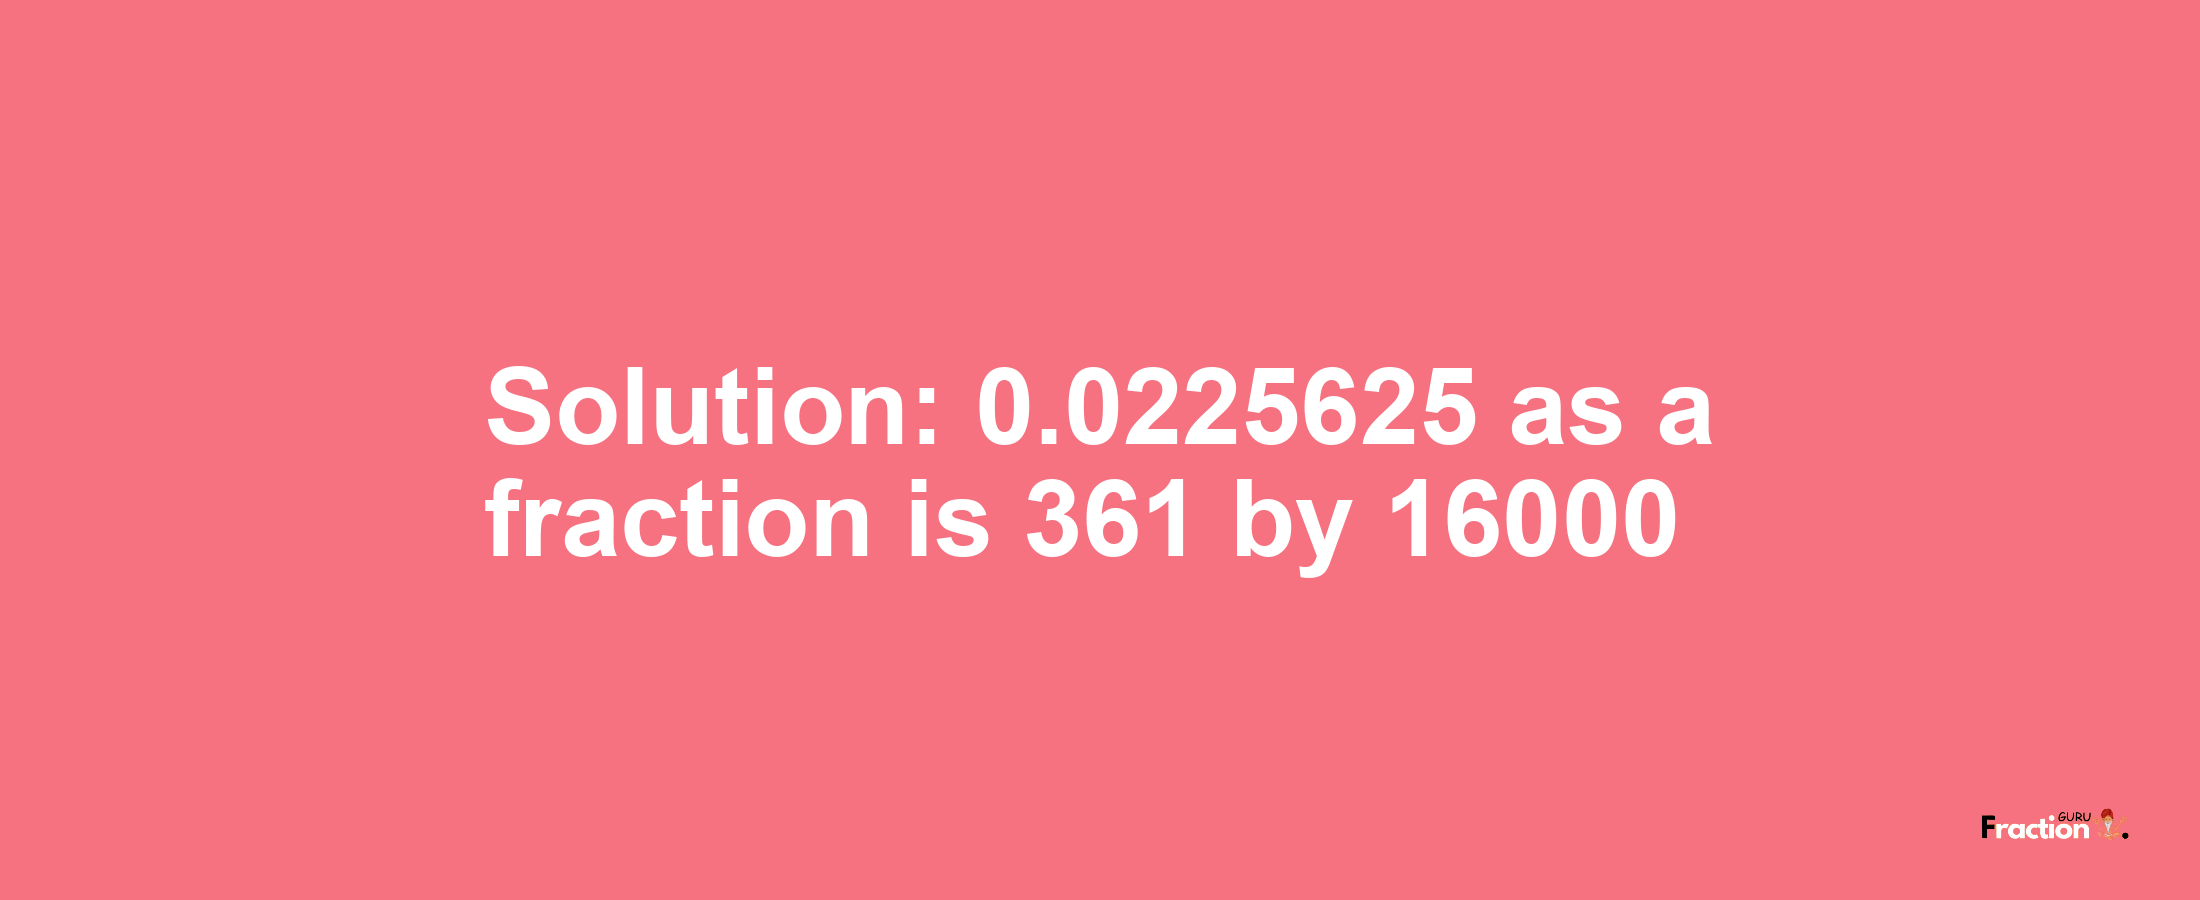 Solution:0.0225625 as a fraction is 361/16000